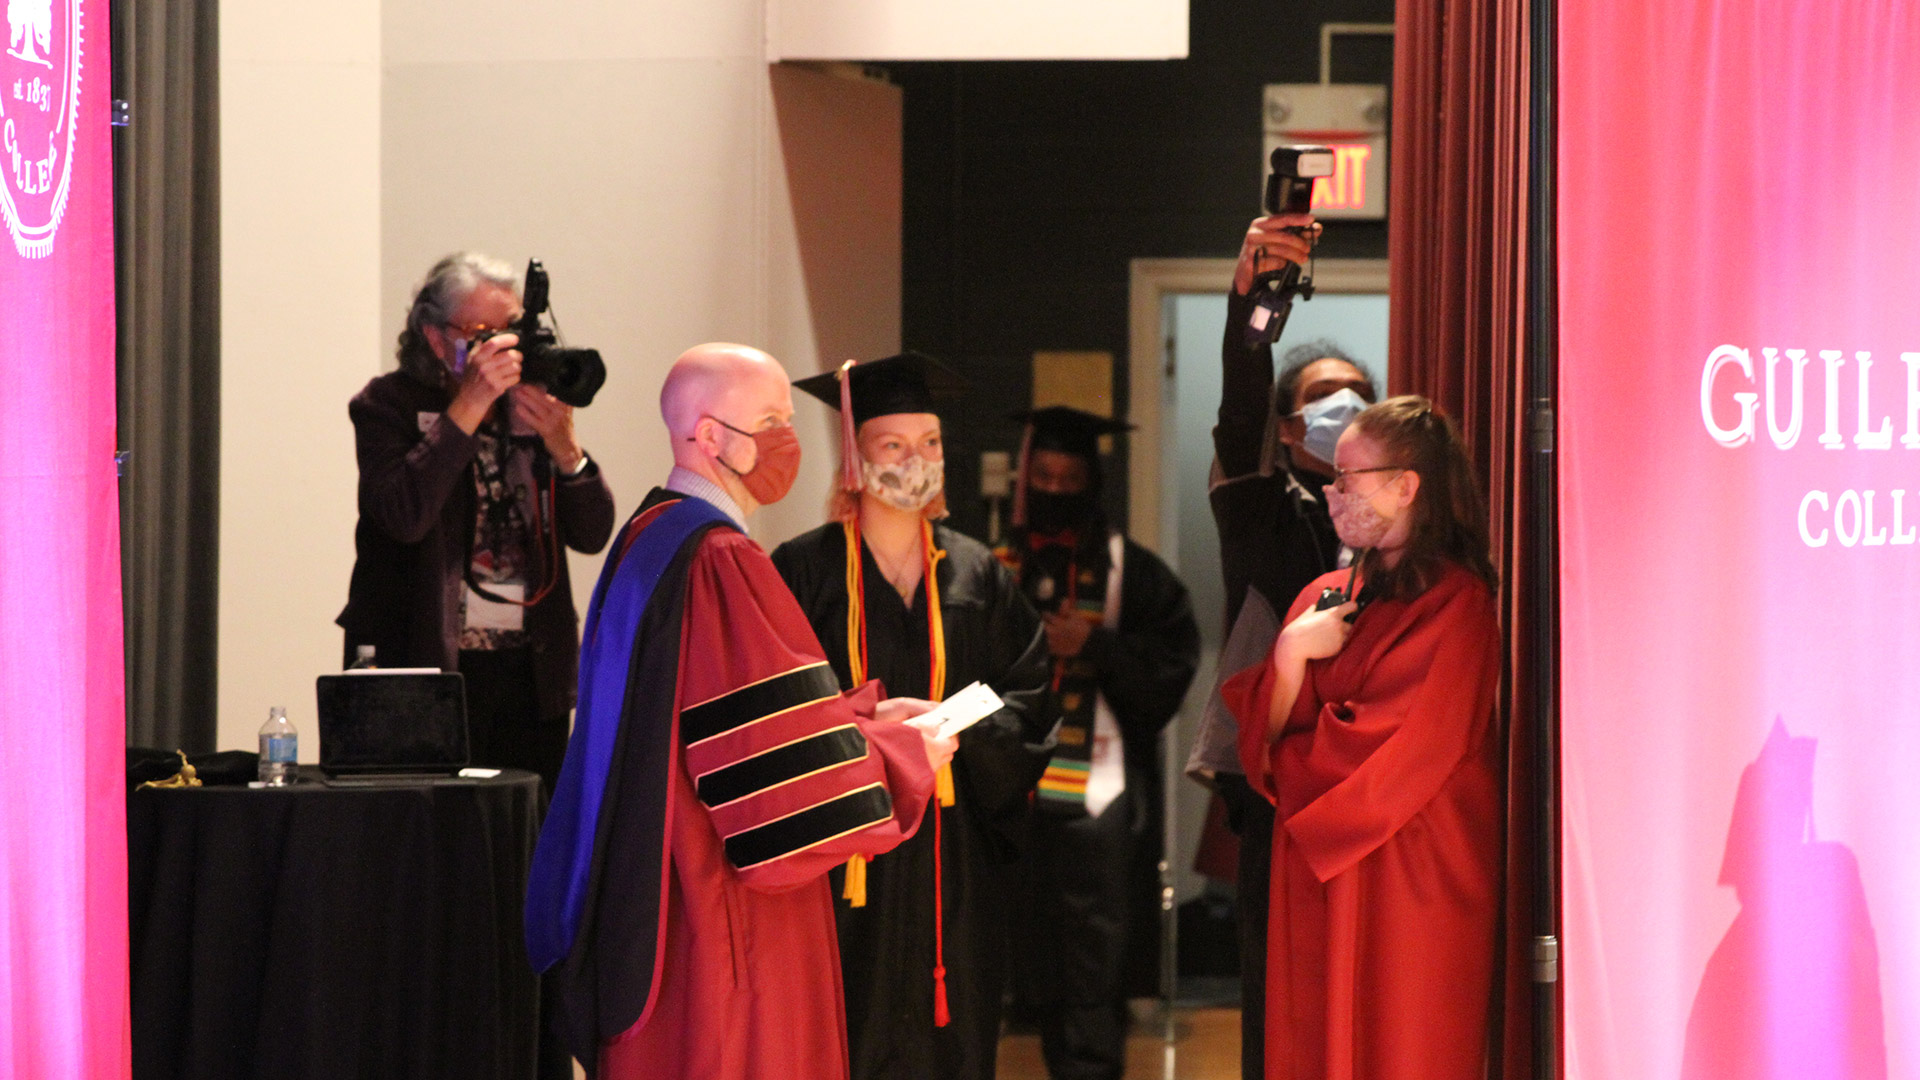 Students and faculty wait backstage as graduates stand in line waiting for their names to be called.